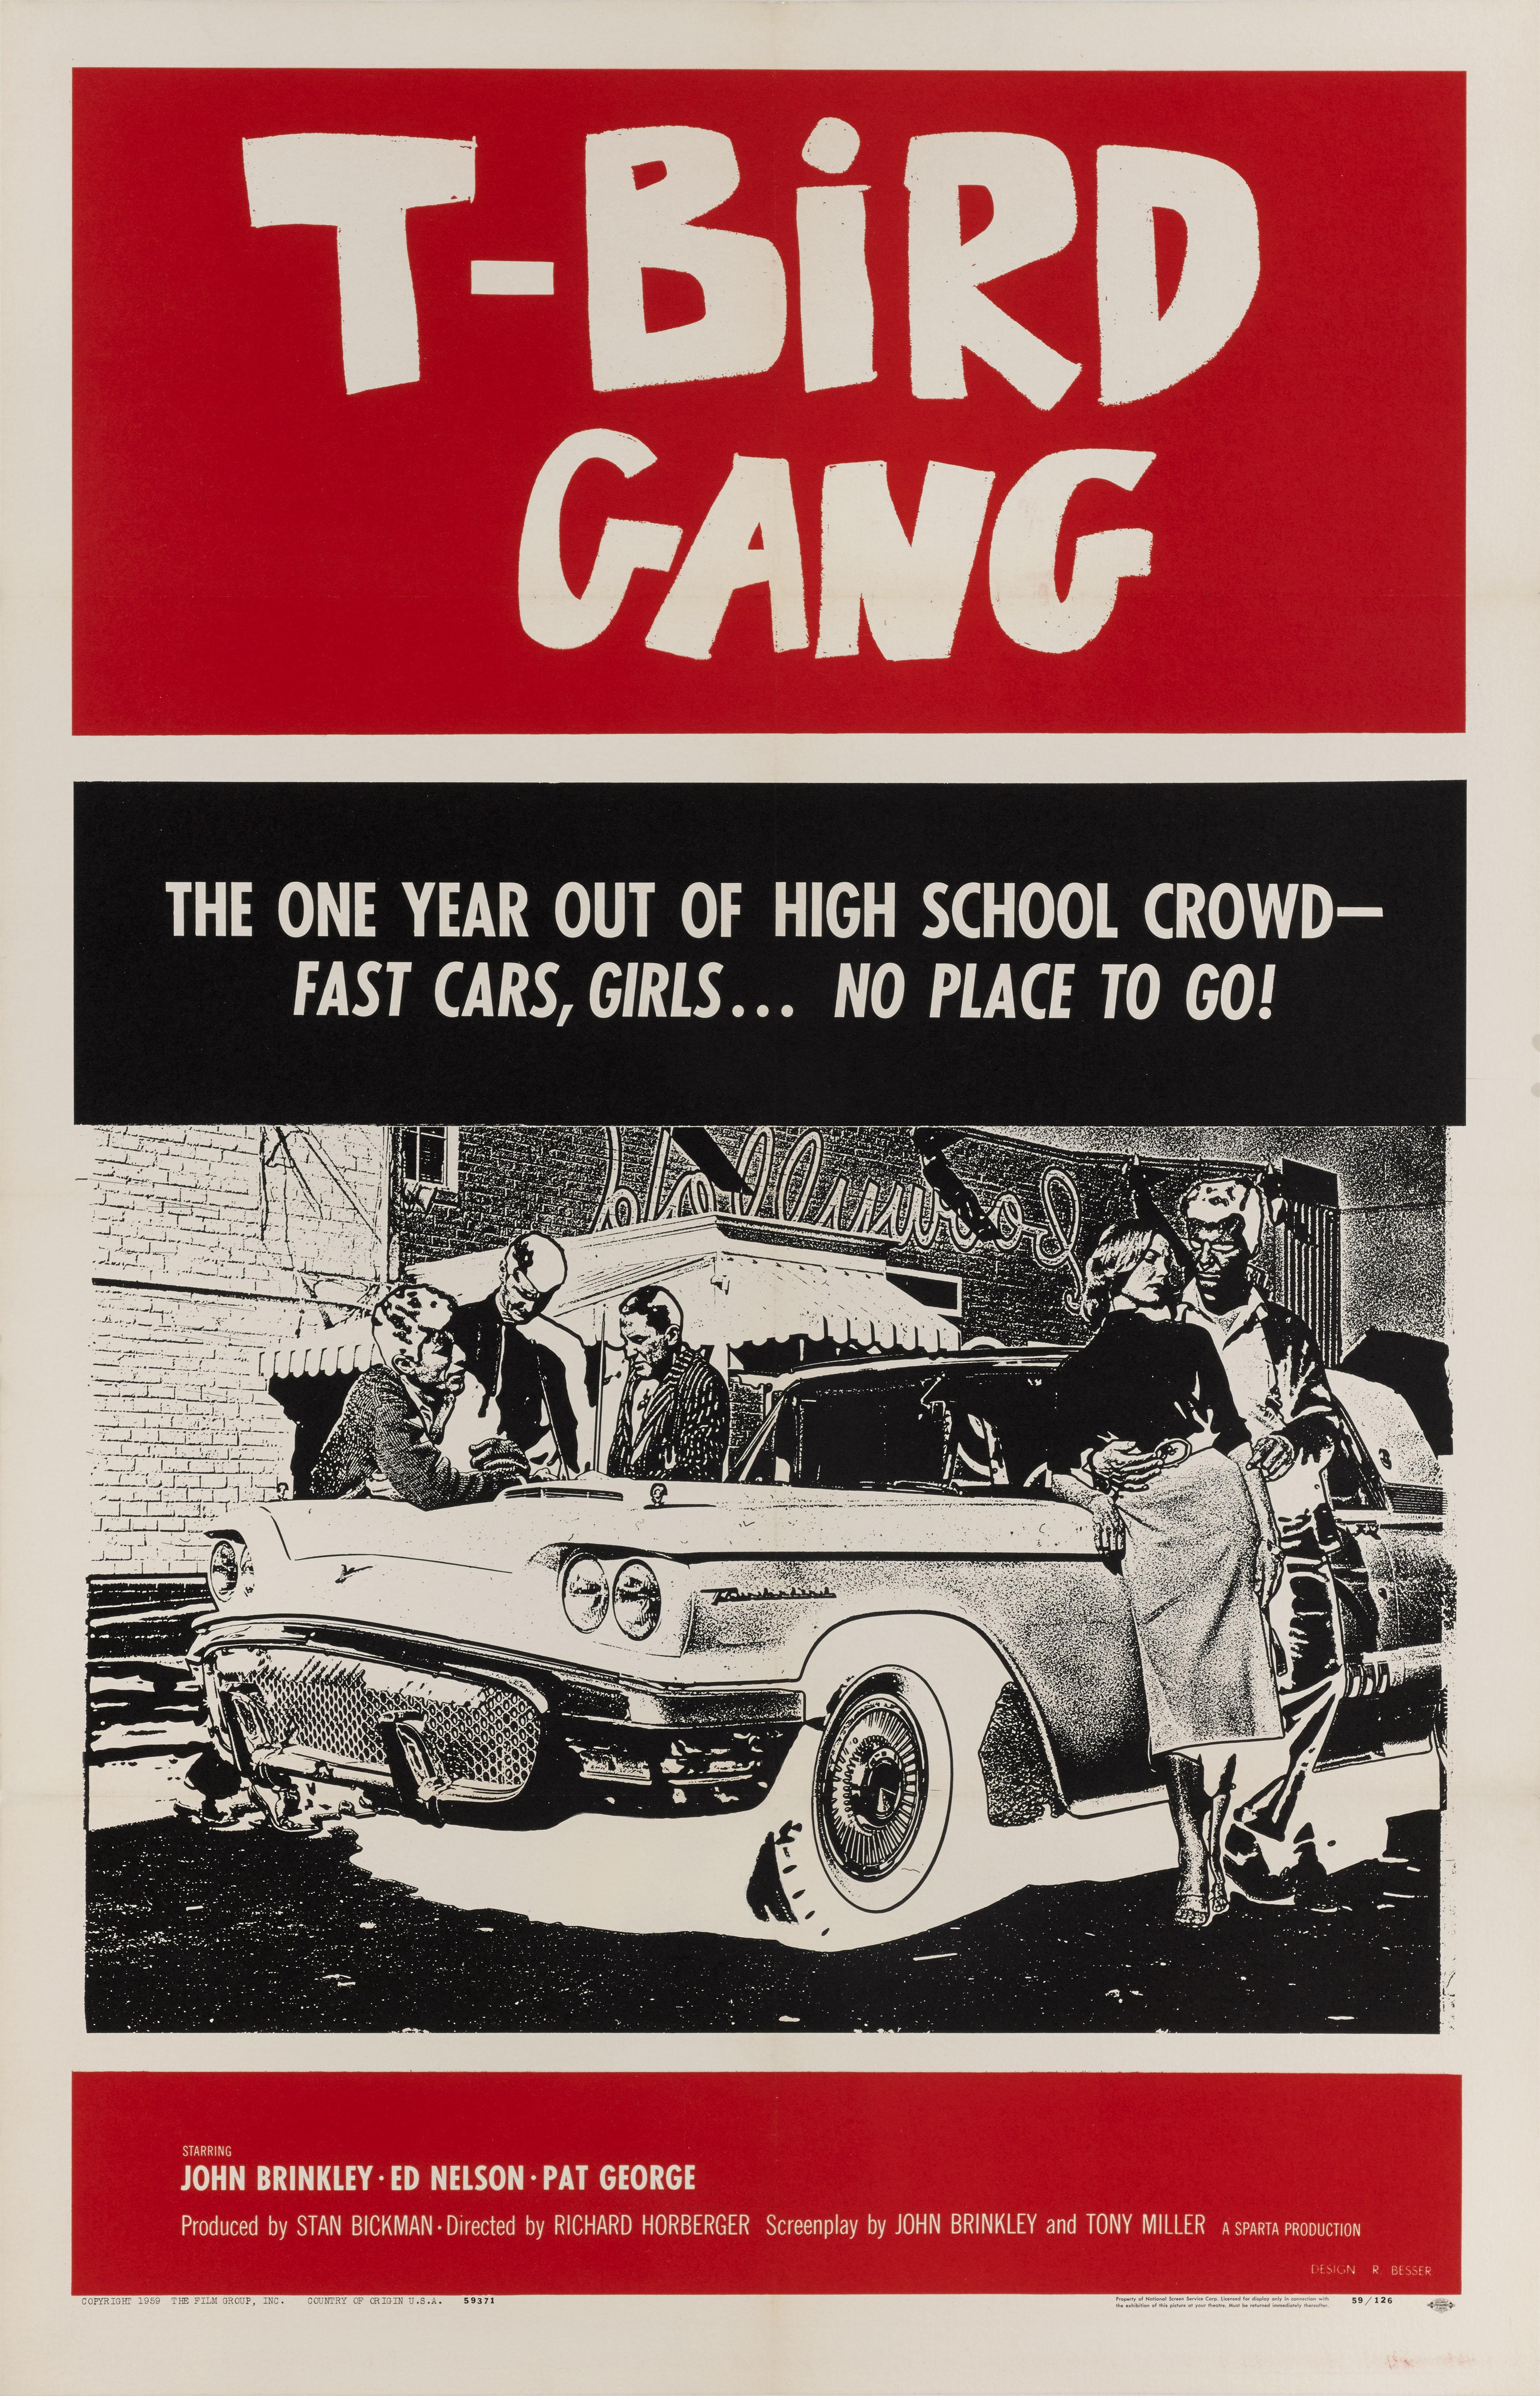 Original US film poster for the 1959 film T-Bird Gang.
The film tells the story of a high school boy who is out to find his father's killer and teams up with a gang of juvenile delinquents to help him.
This film was directed by Richard Harbinger